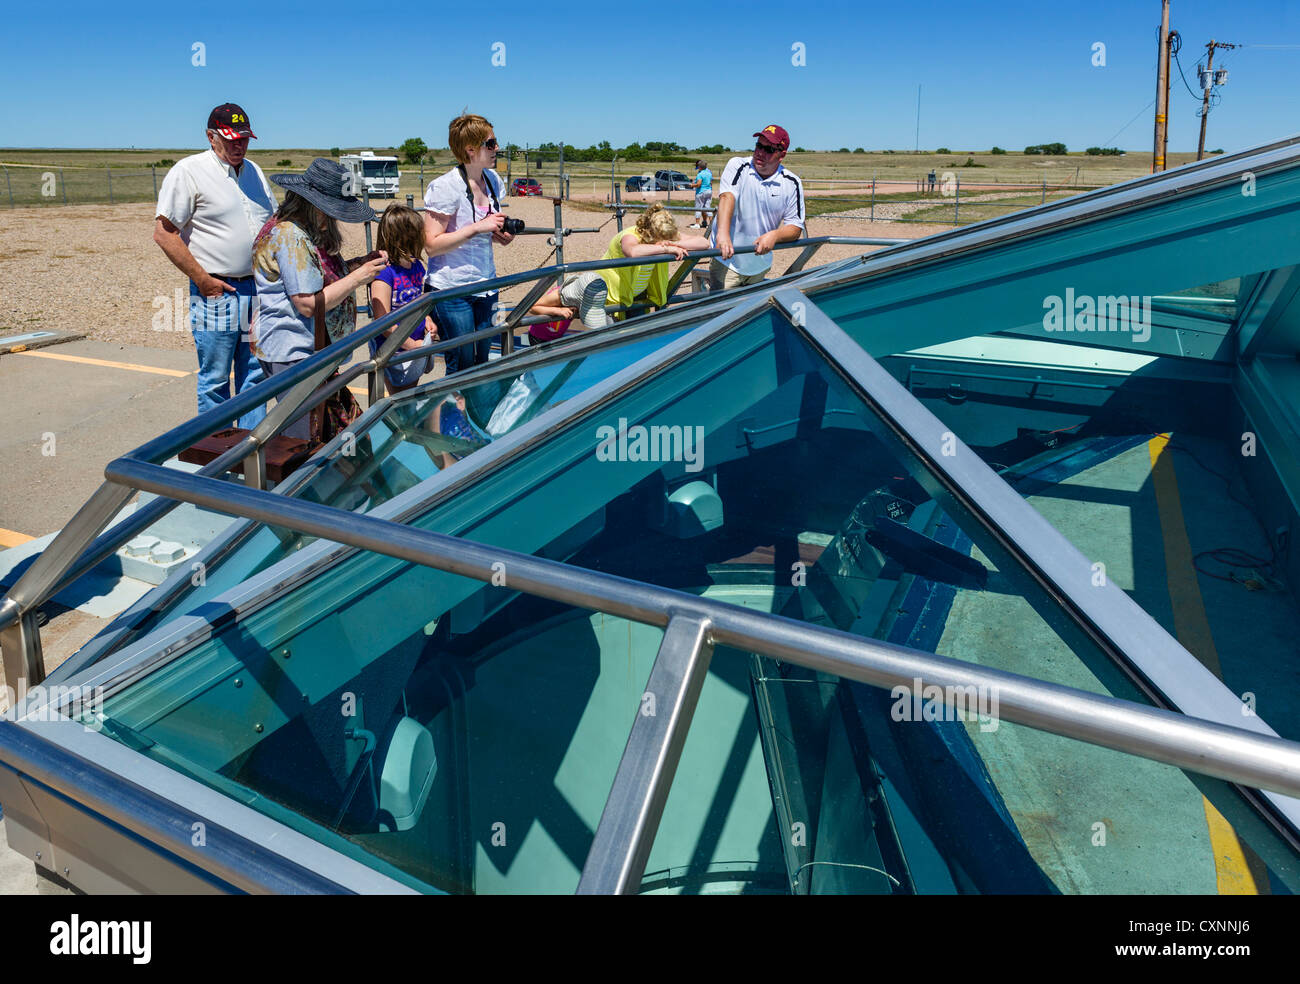 Tourists at the Minuteman II ICBM missile silo at the Minuteman Missile National Historic Site, near Wall, South Dakota, USA Stock Photo